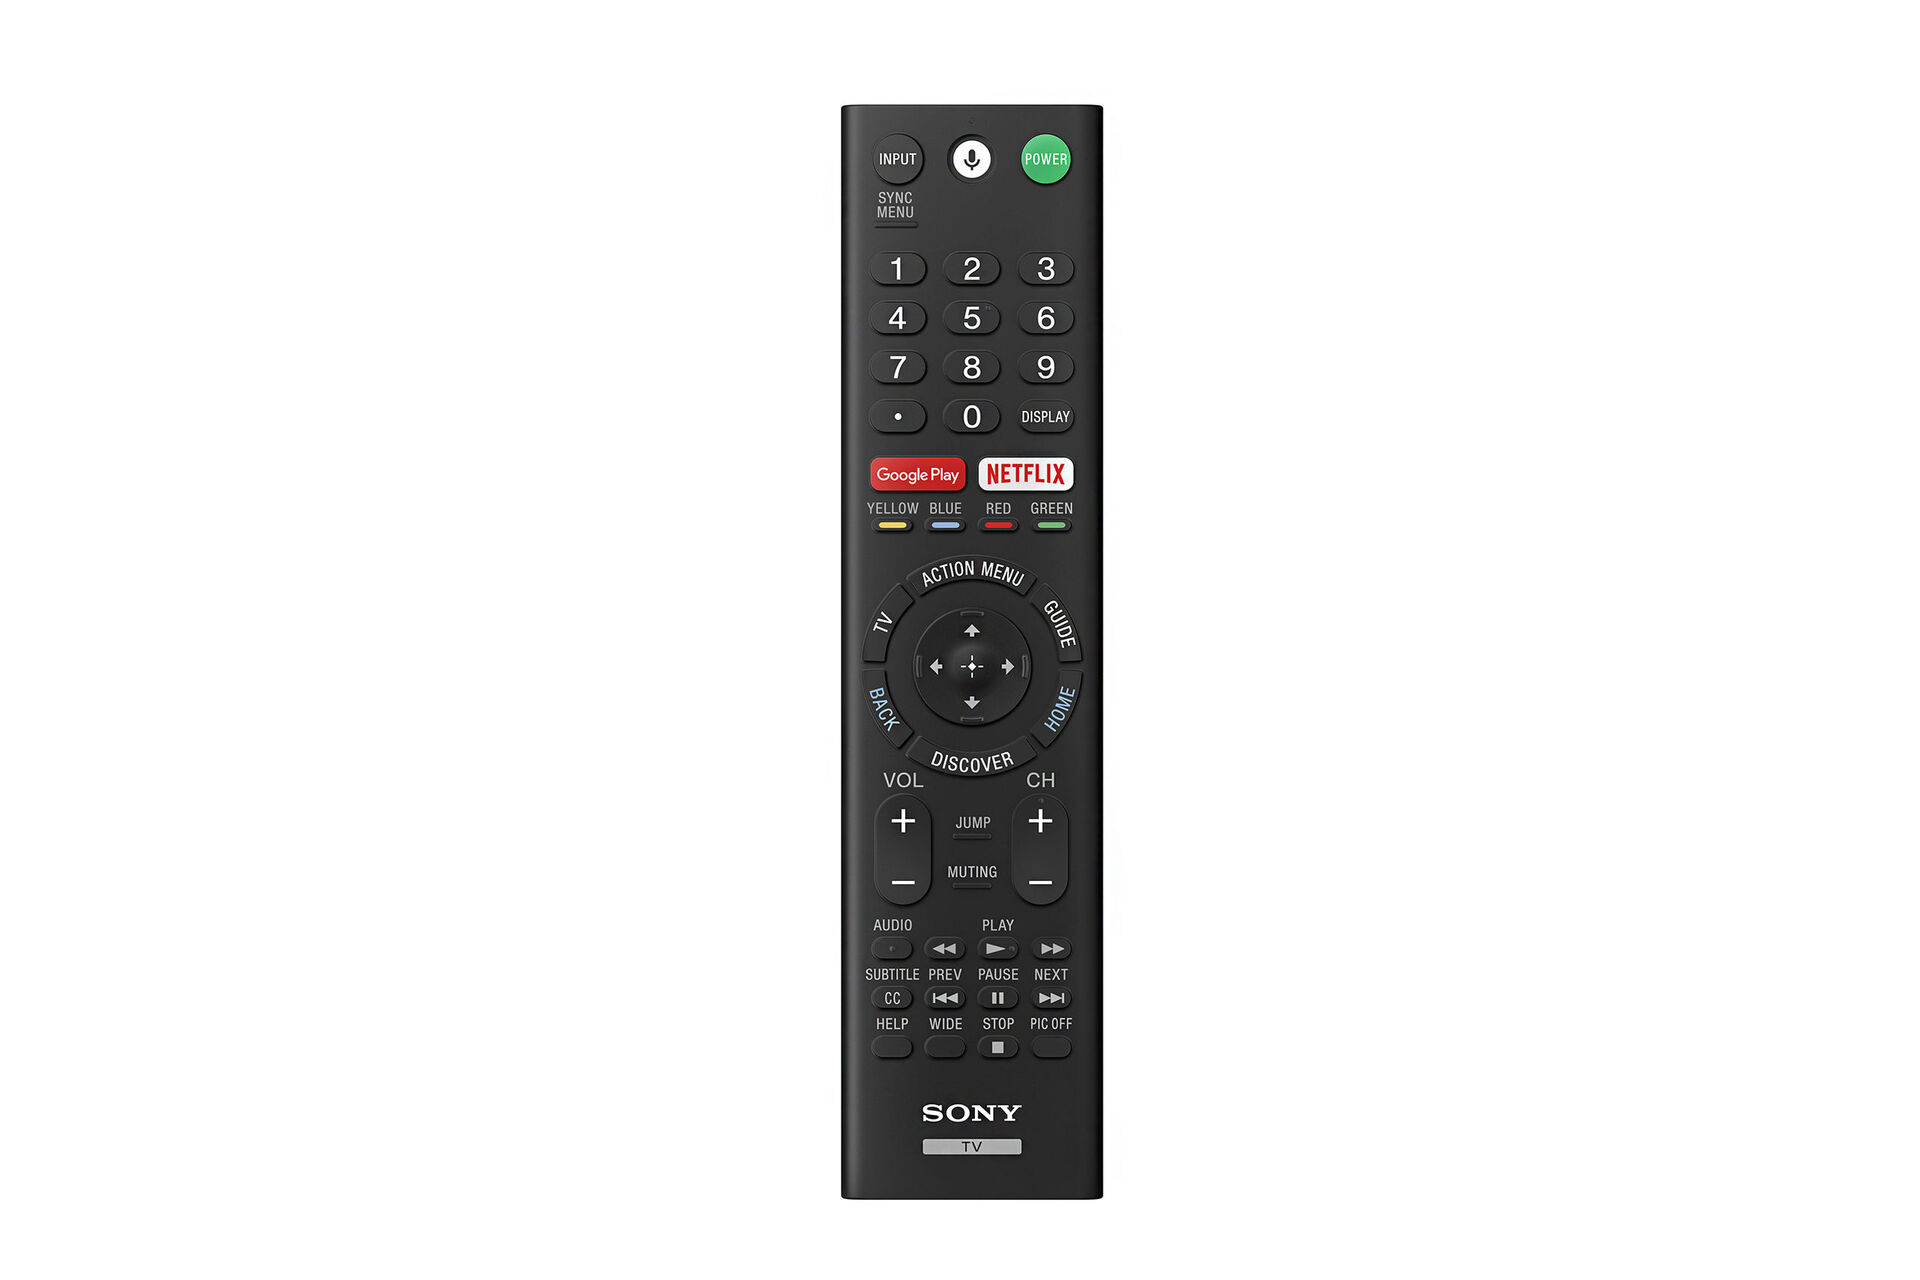 Sony KD-55A1 OLED TV Remote Control